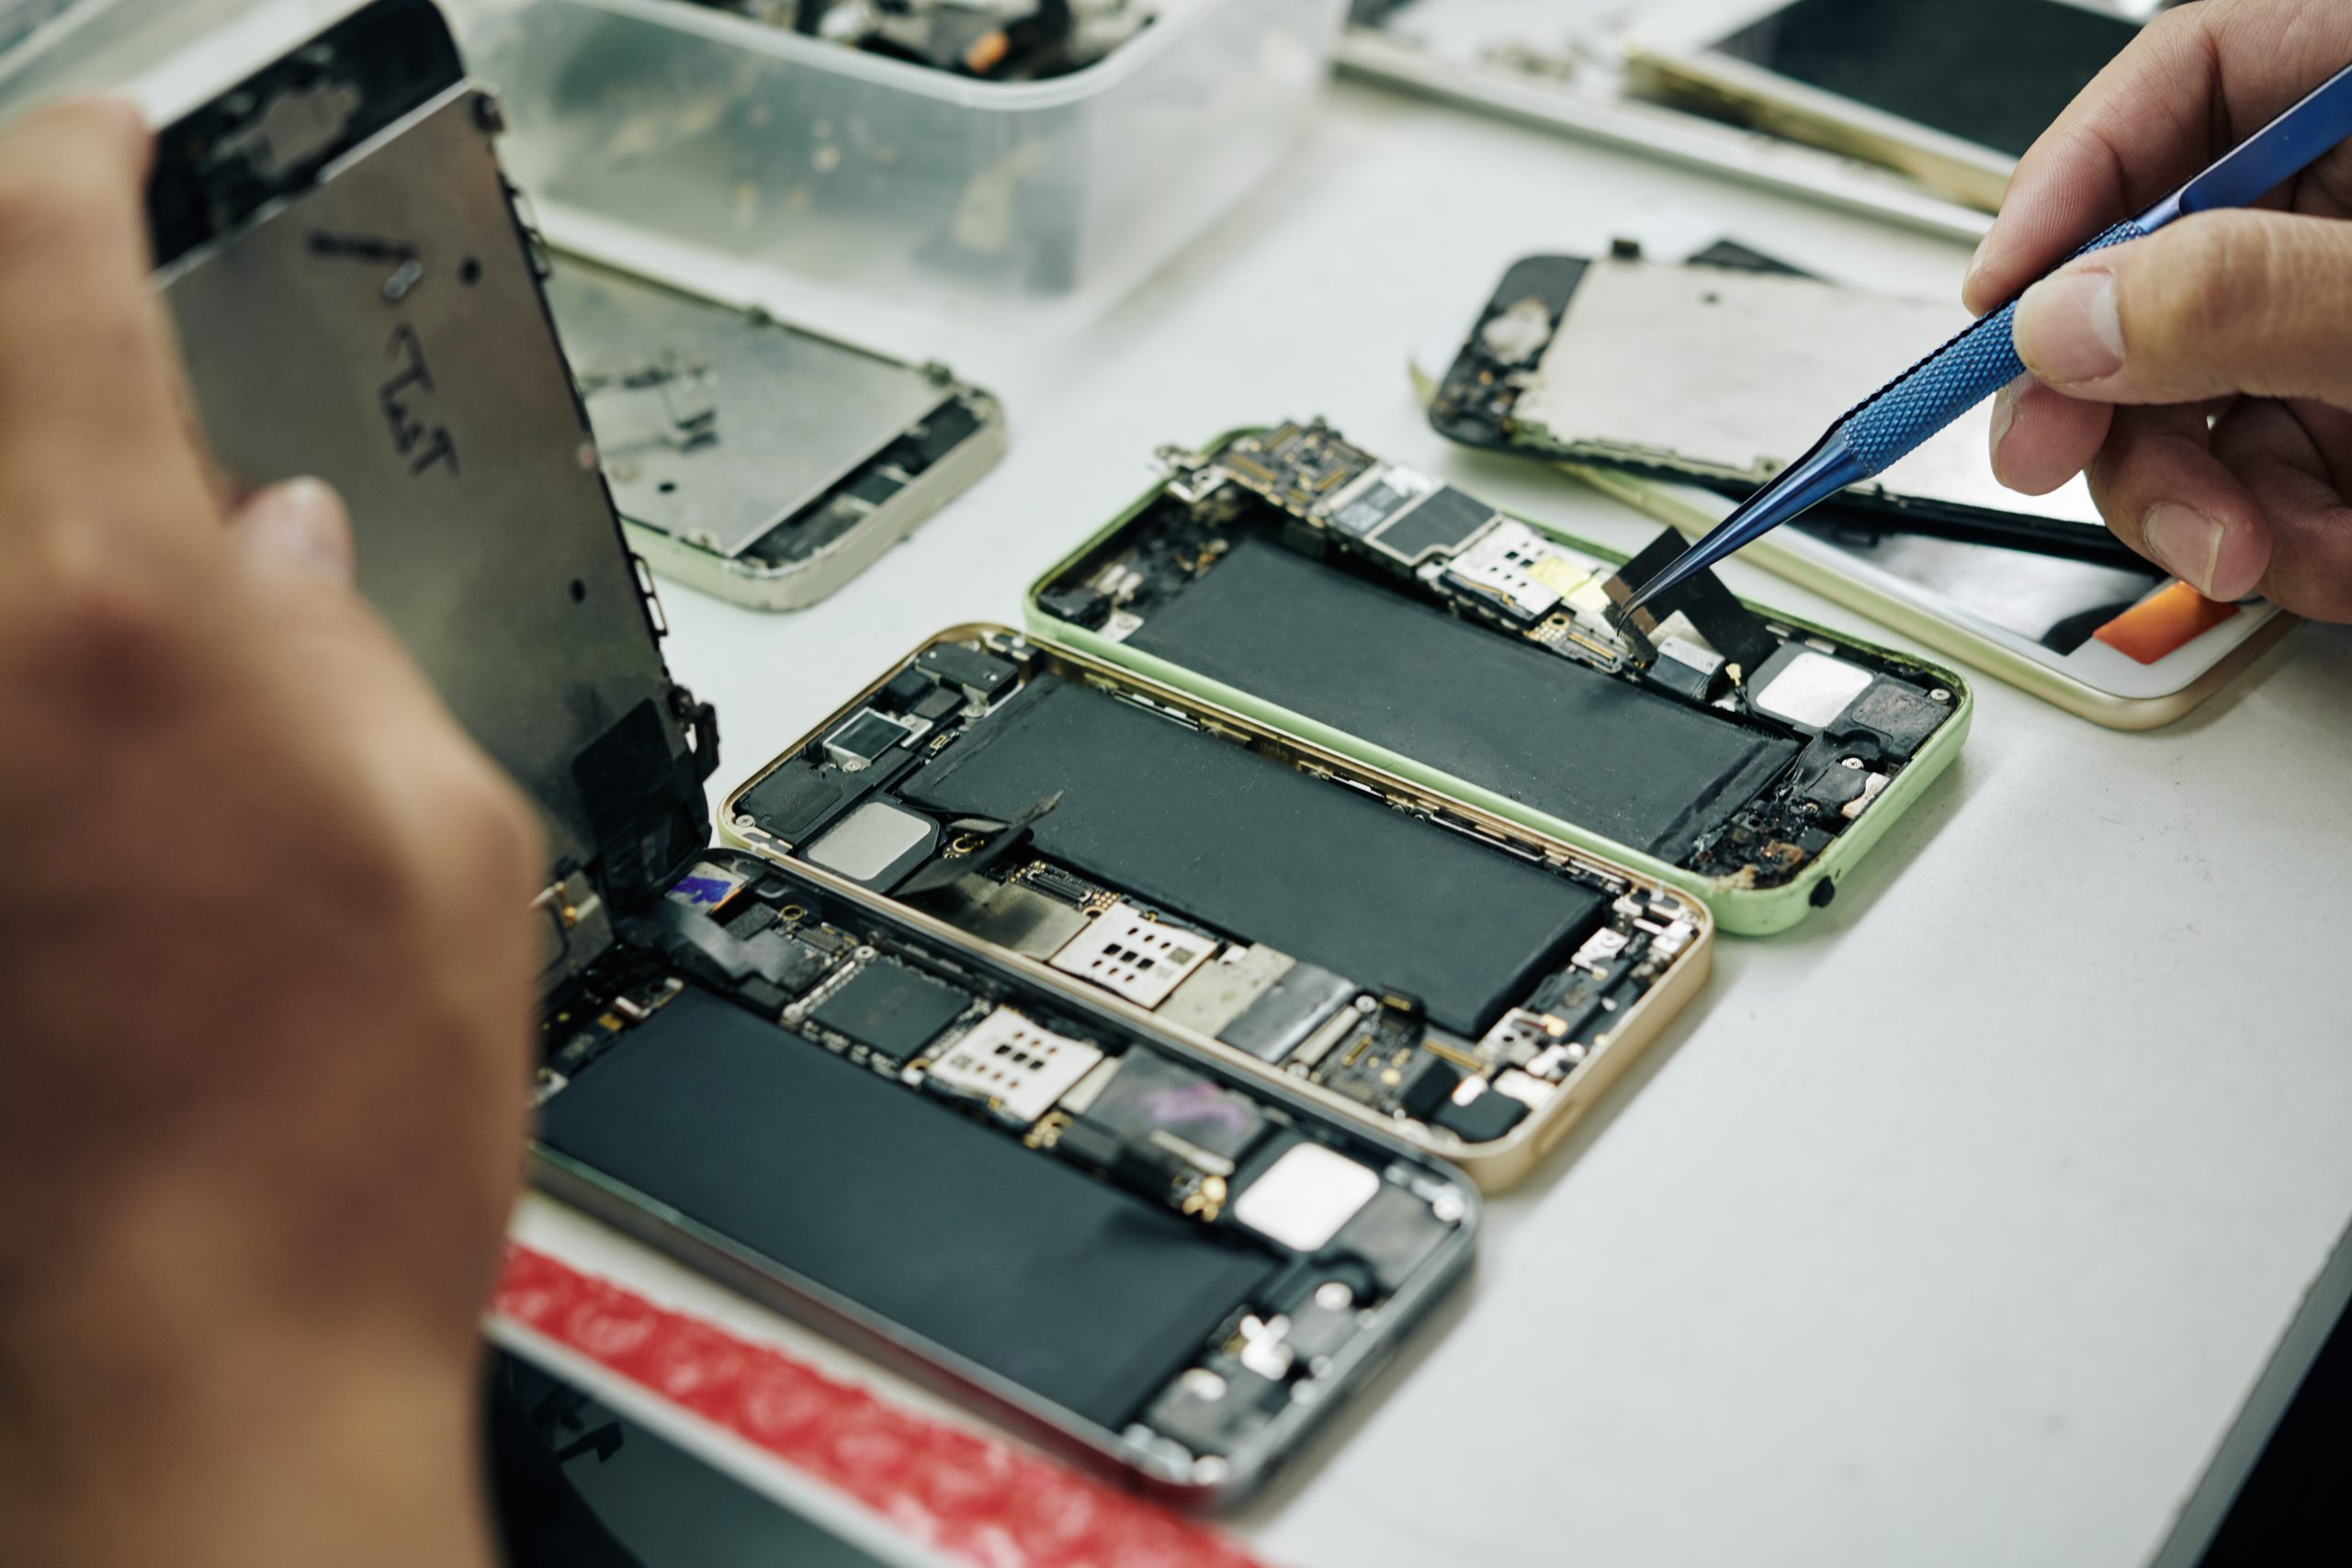 Swift Solutions: Fast iPhone Fixes at One Hour Device Repair